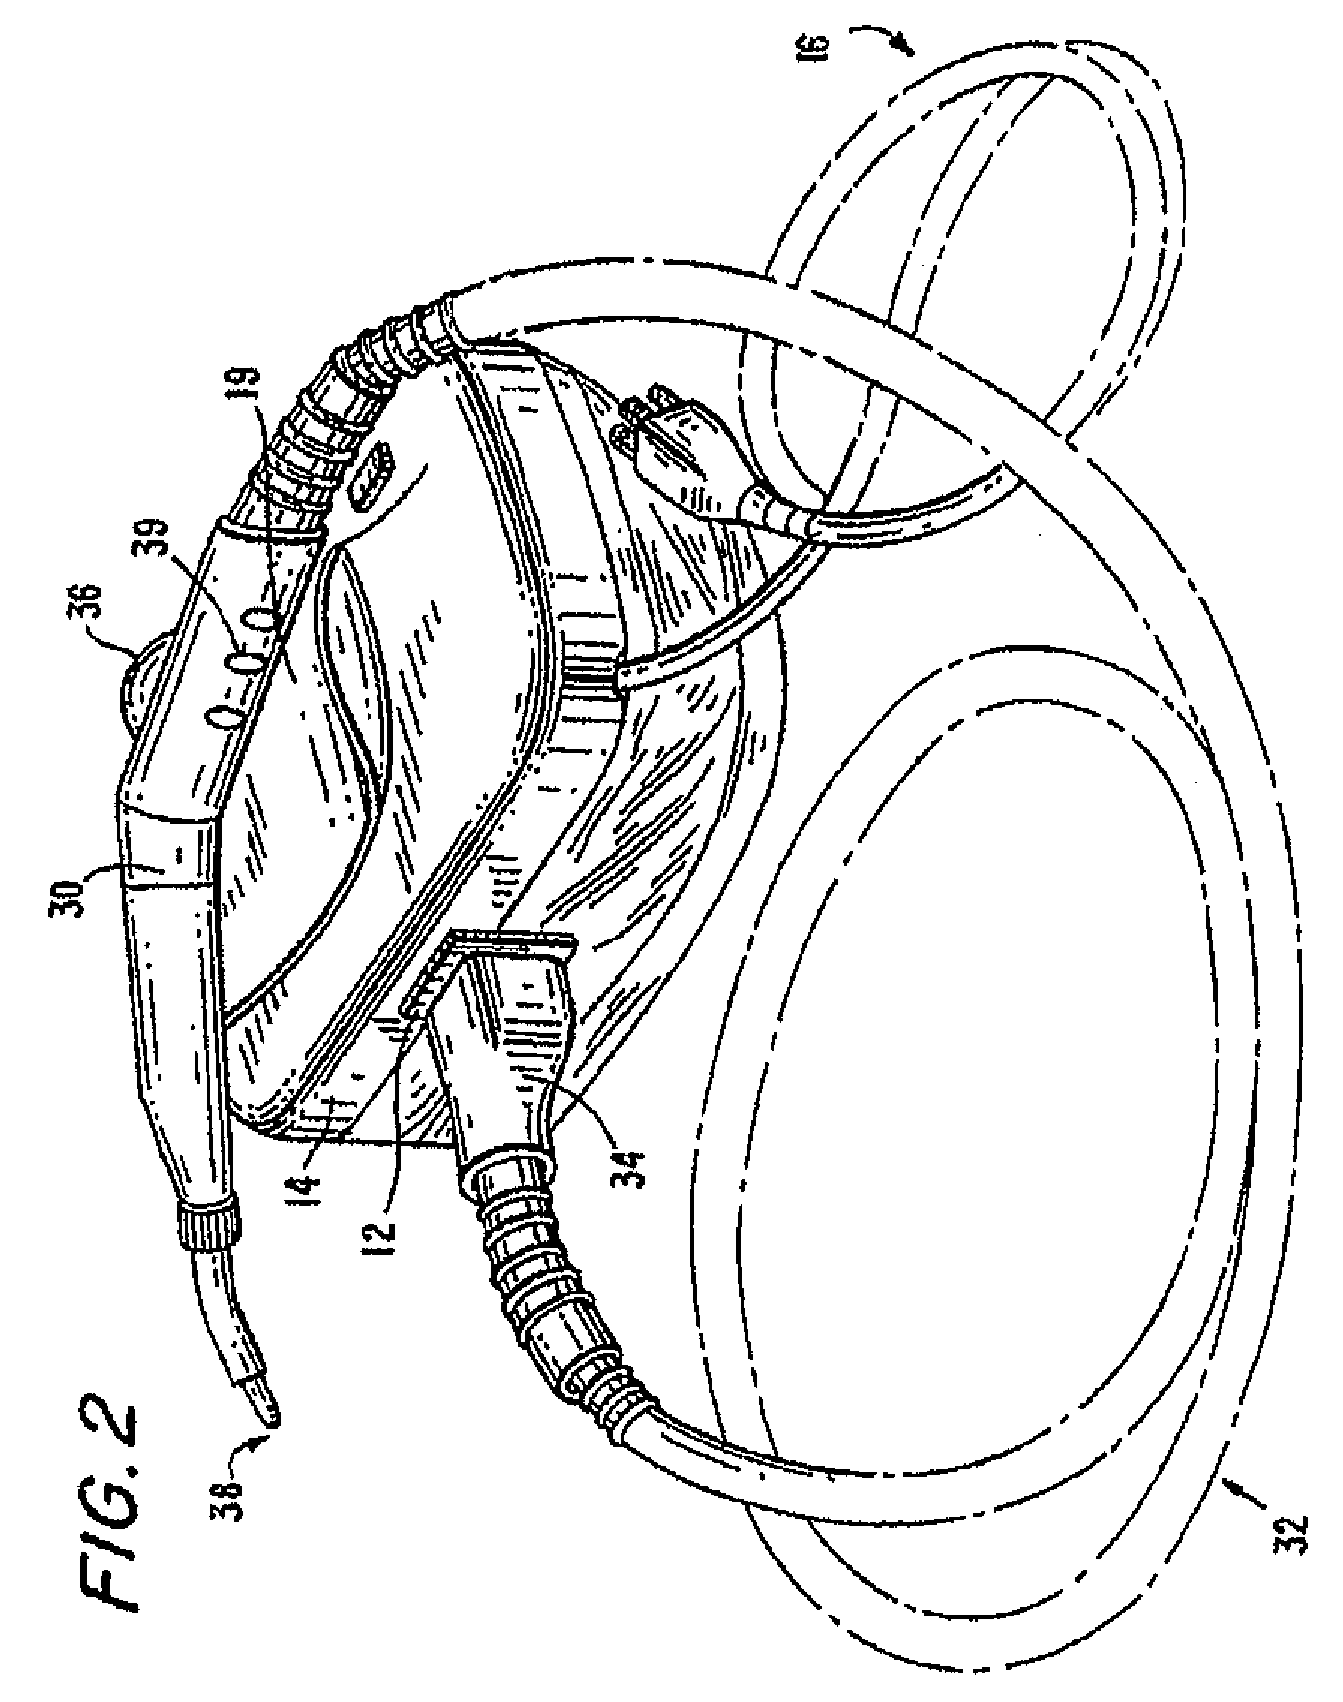 Steam cleaner and steam iron apparatus